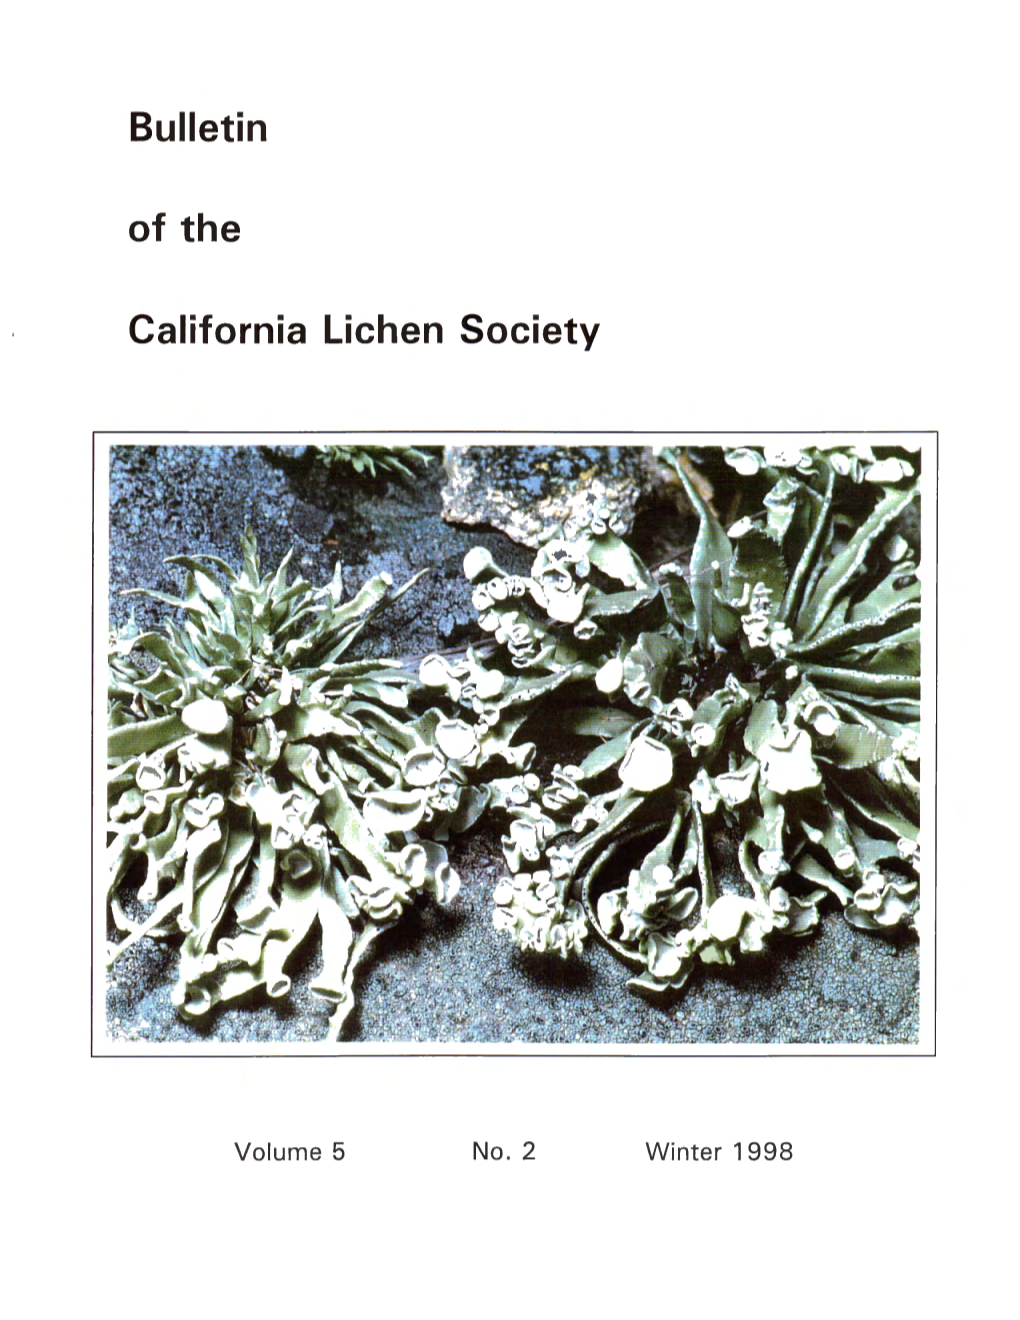 Winter 1998 the California Lichen Society Seeks to Promote the Appreciation, Conservation, and Study of the Lichens